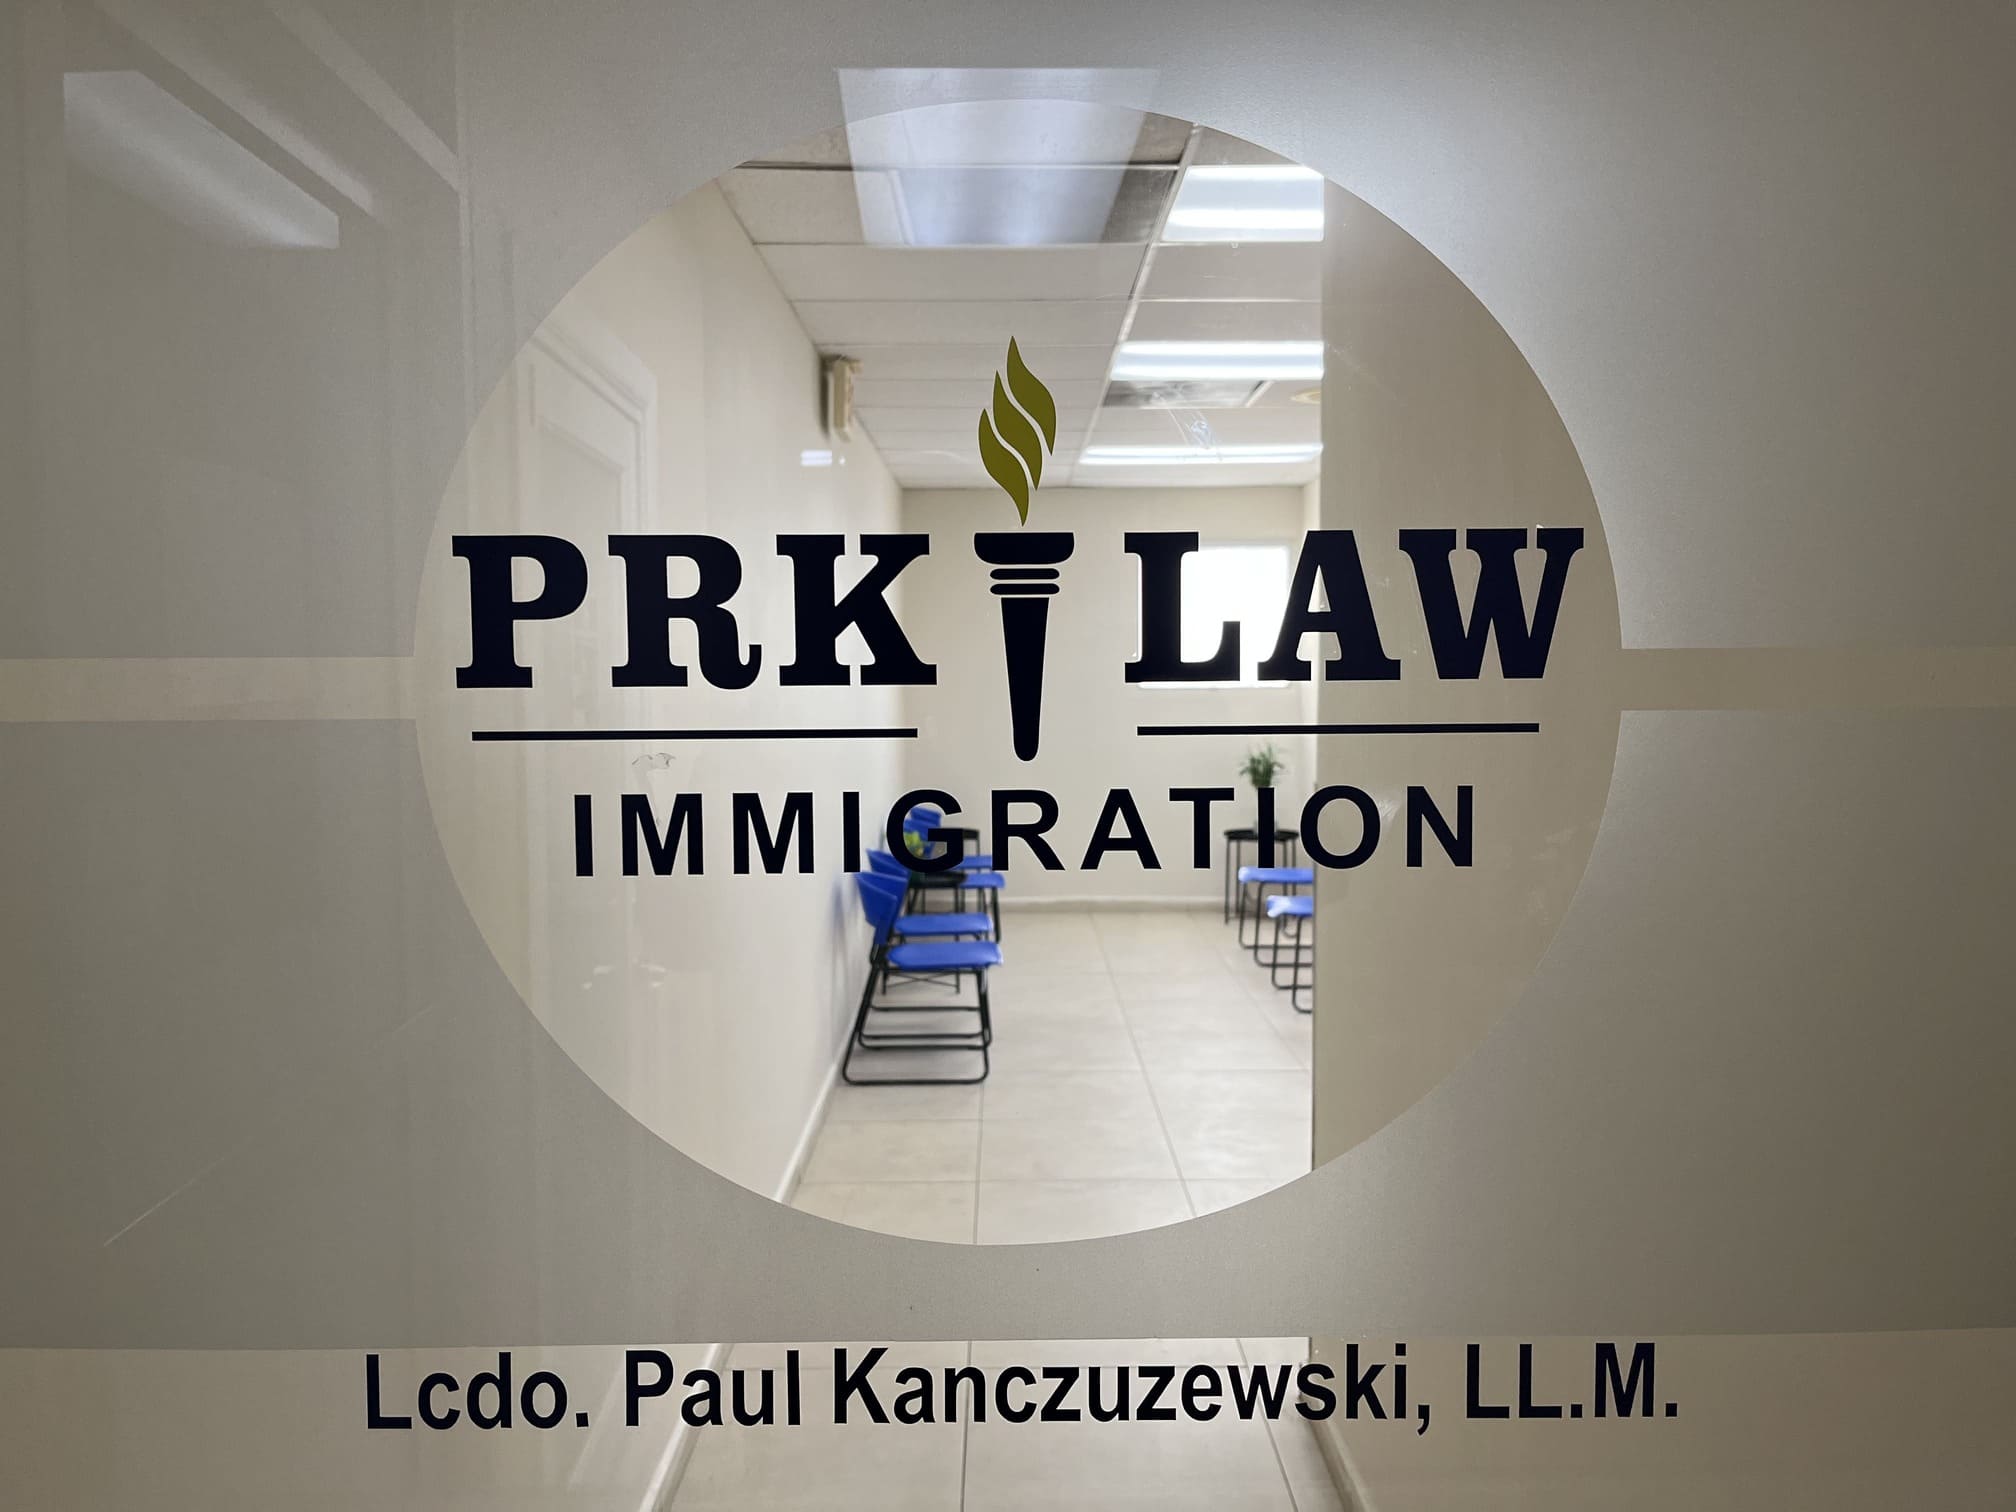 PRK Law Immigration